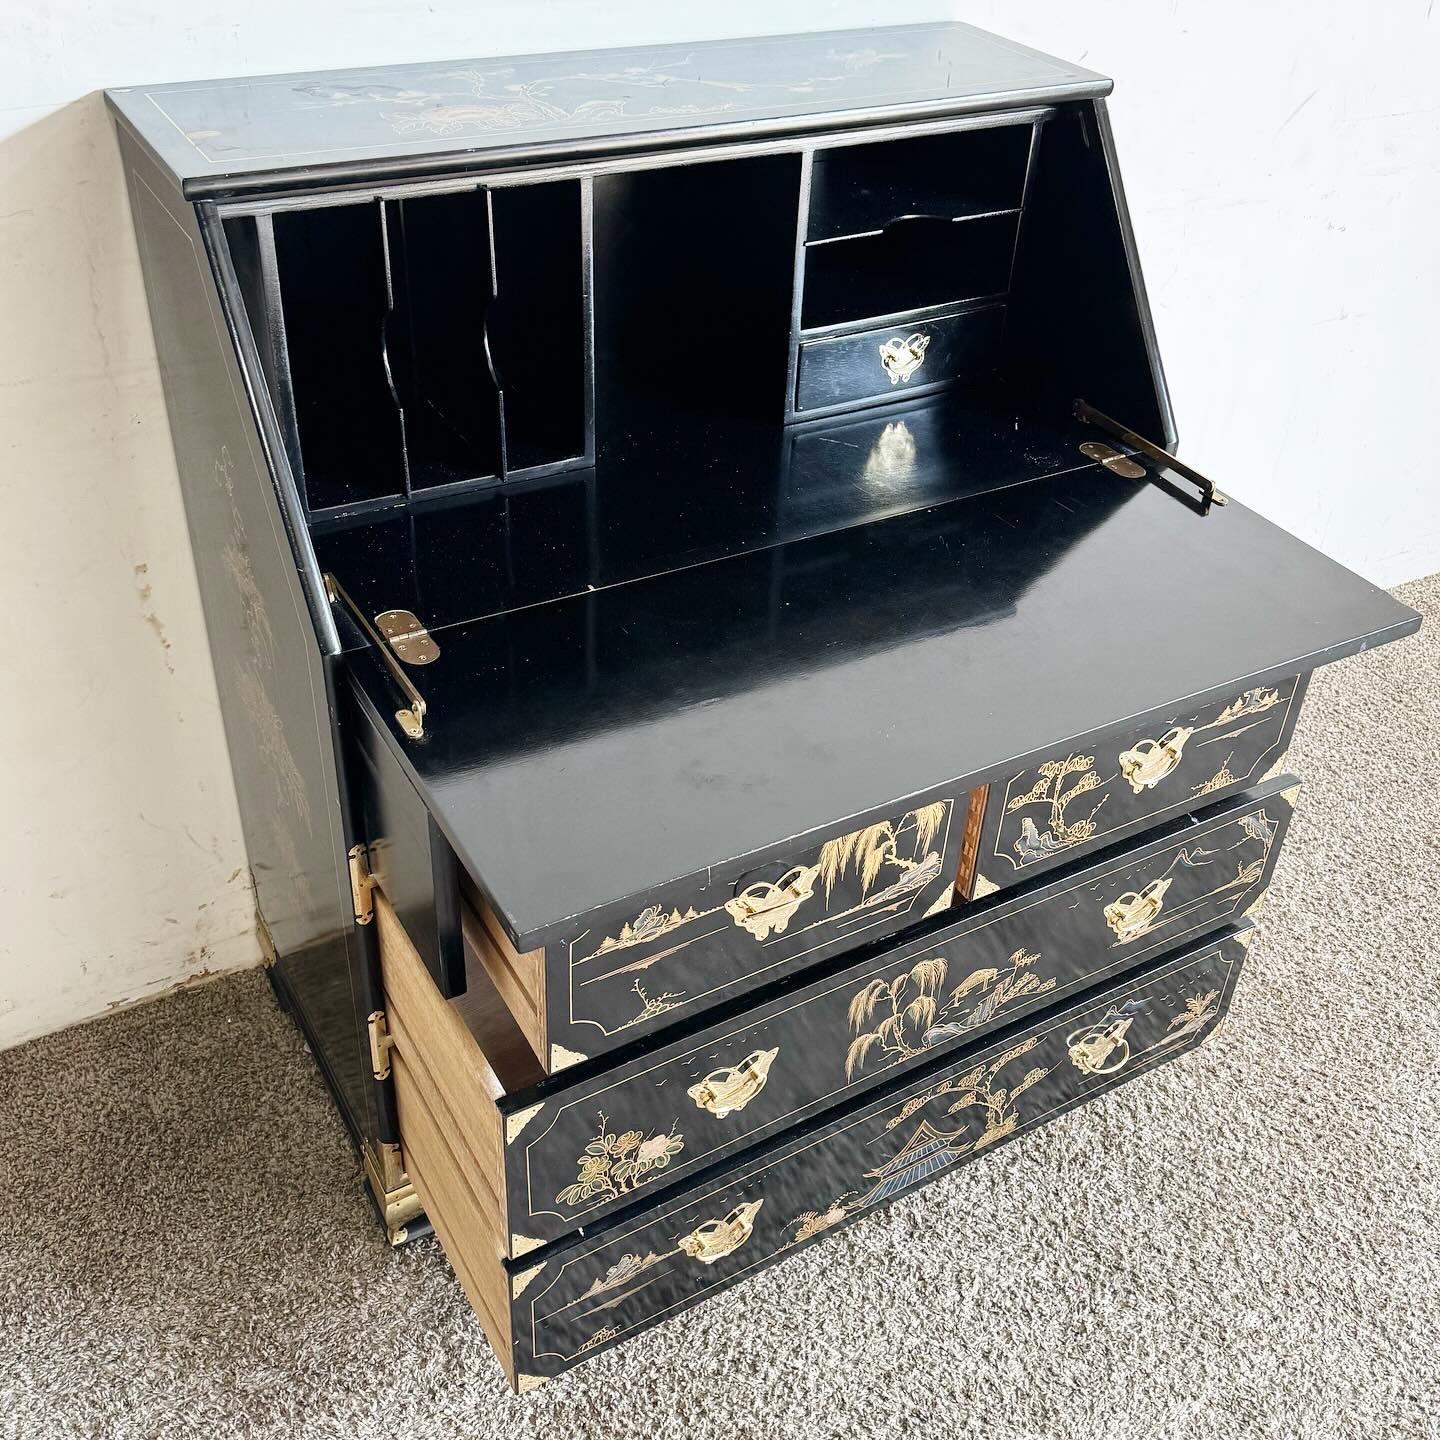 Immerse yourself in the beauty of traditional Chinese craftsmanship with this Hand Painted/Black Lacquered and Brass Secretary Desk. Featuring intricate hand-painted scenes on a rich black lacquer finish, complemented by brass accents, this desk is